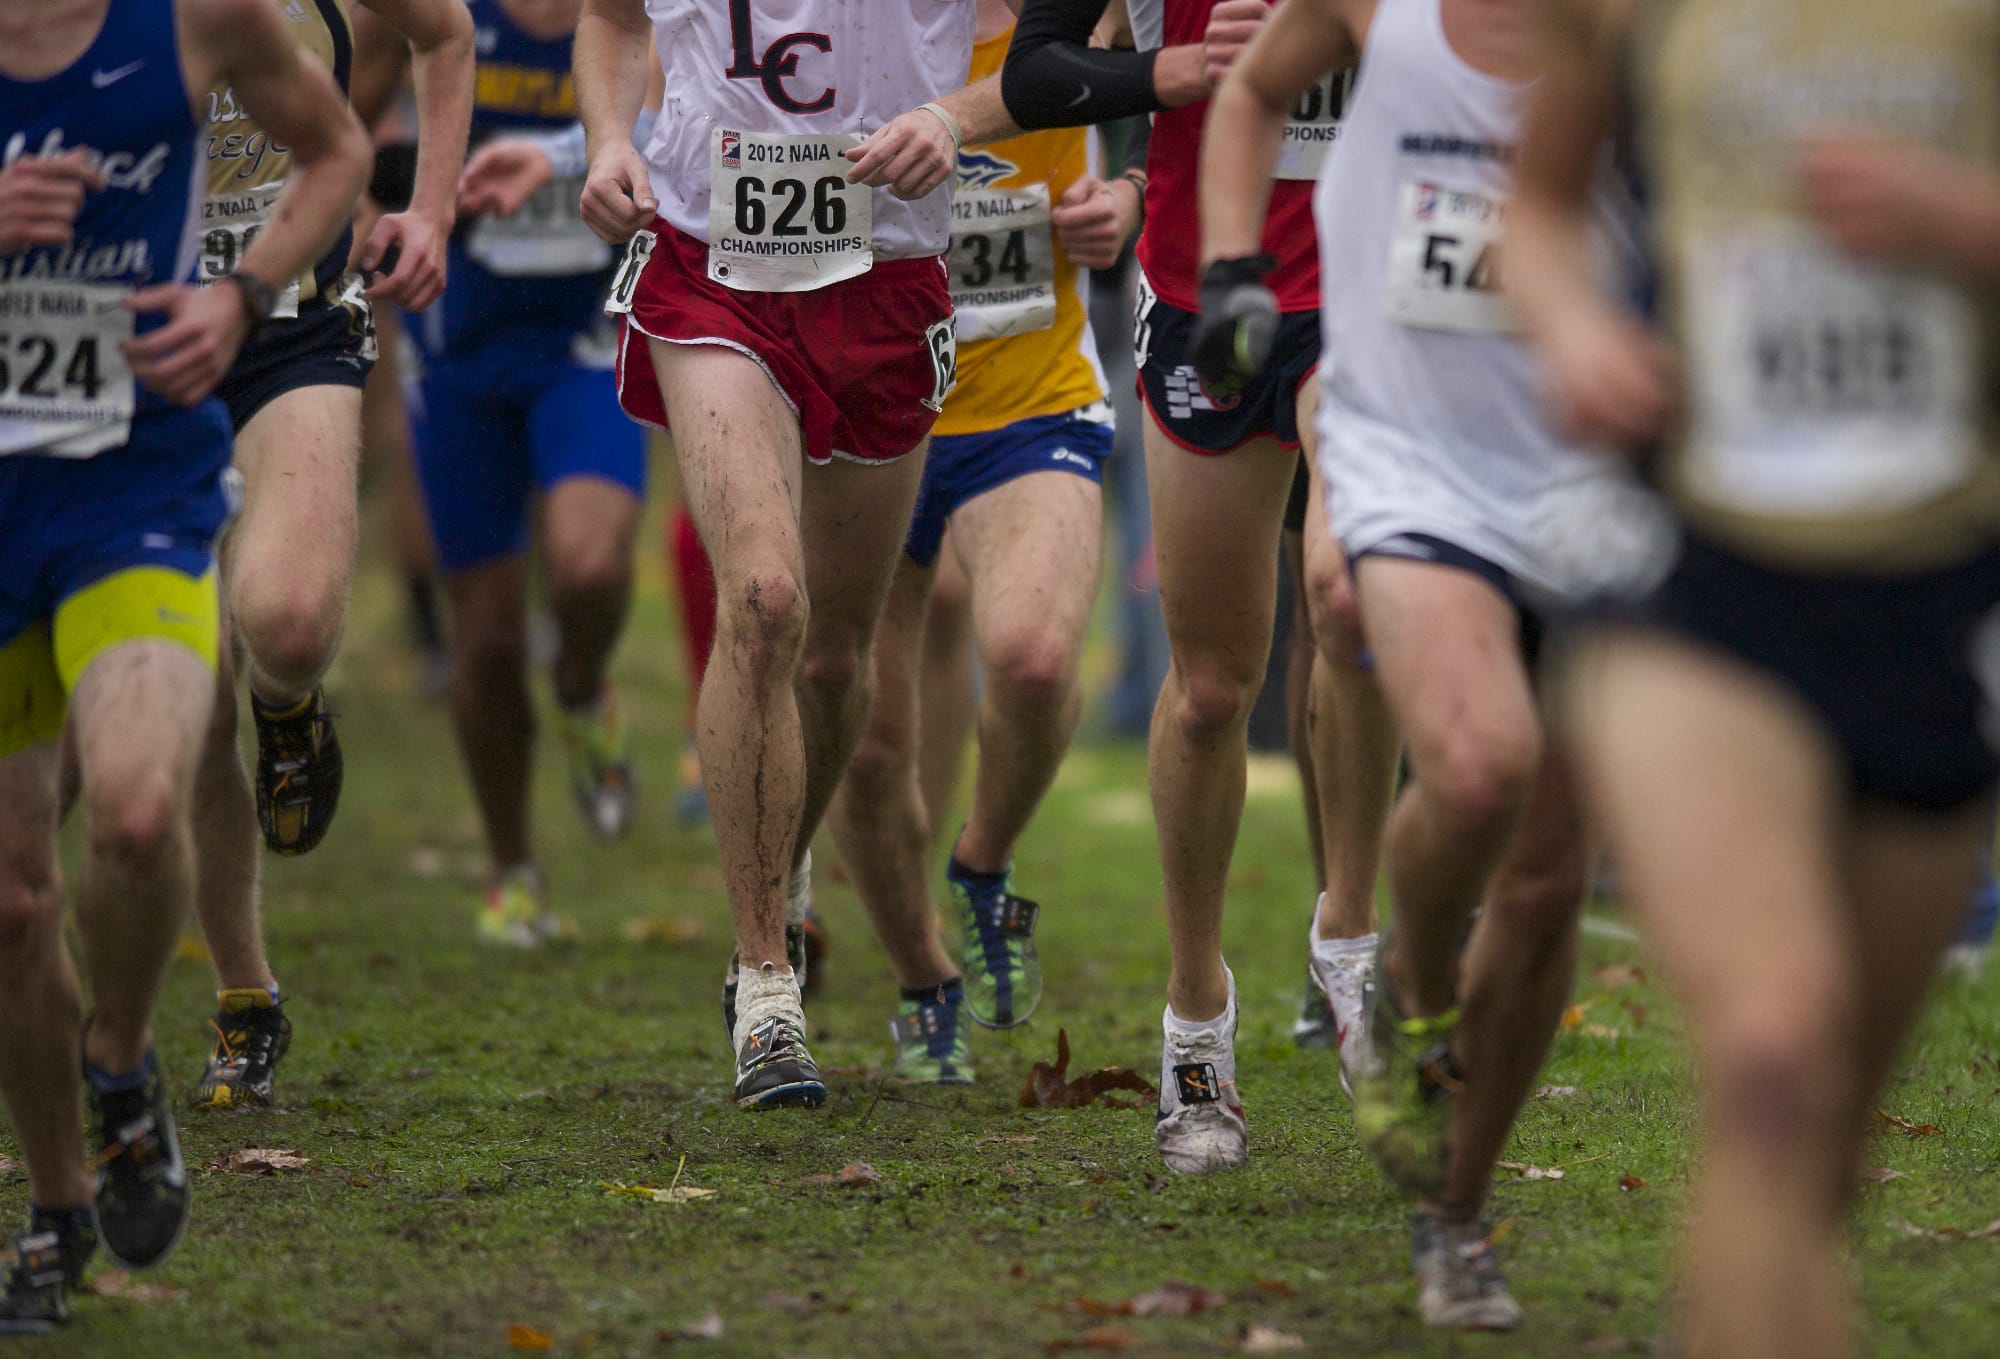 The men battle the weather as well as each other as they run the NAIA cross country national championship race at Fort Vancouver on Nov. 17, 2012. The NAIA announced on Monday, Dec. 12, 2016, that the 2017 and 2019 championships will return to Vancouver.